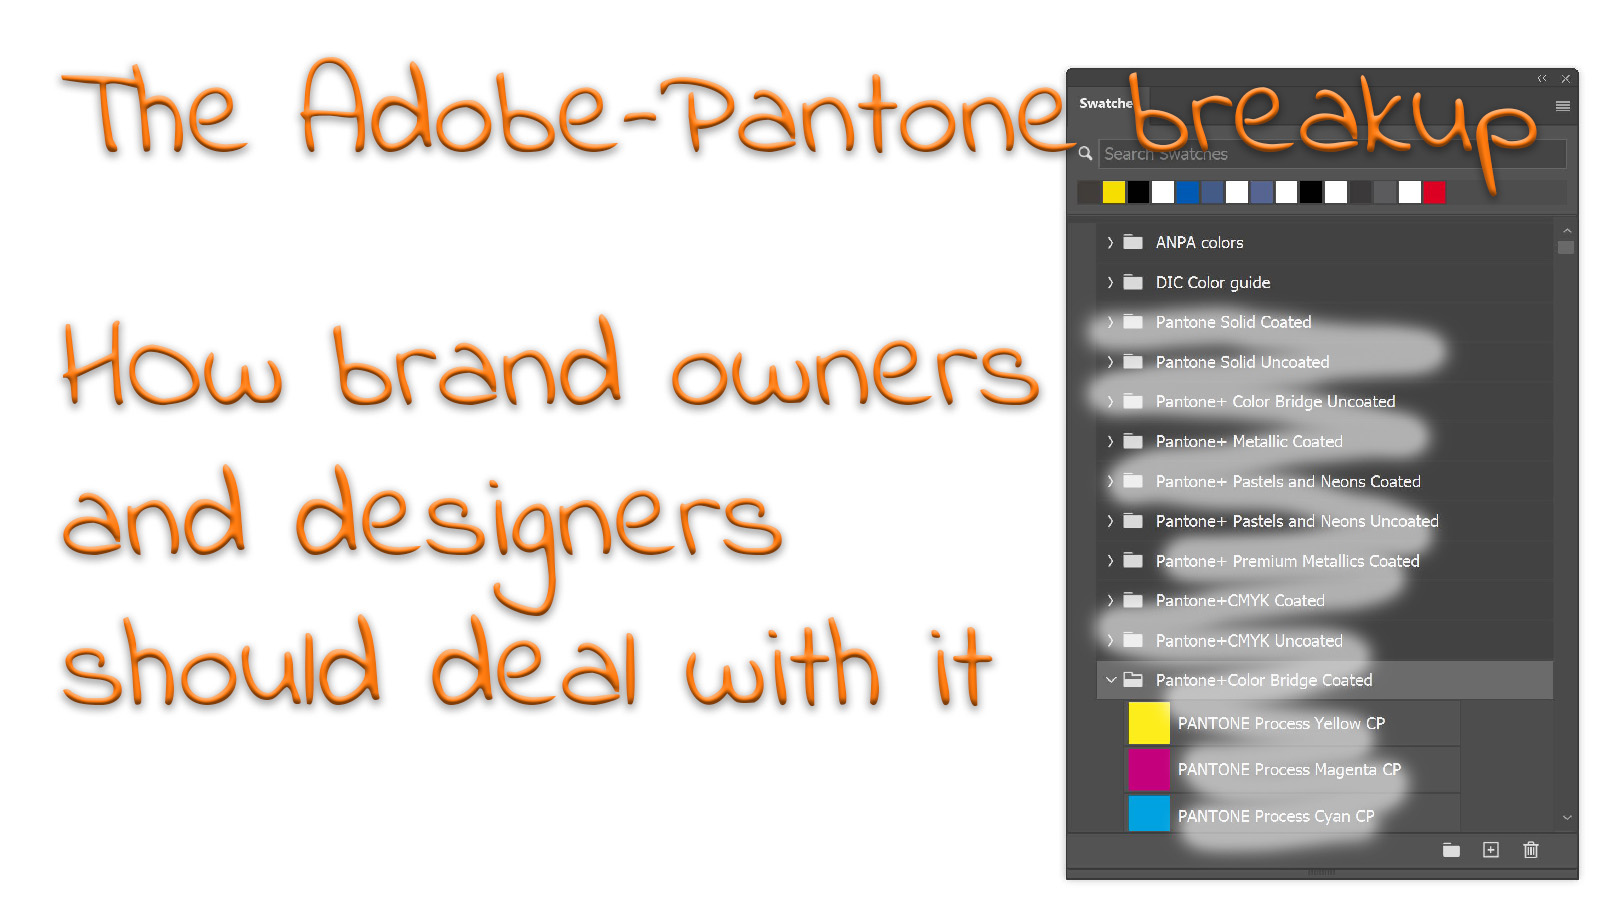 Pantone Not Supported - Adobe Photoshop Workaround with Pantone Connect 